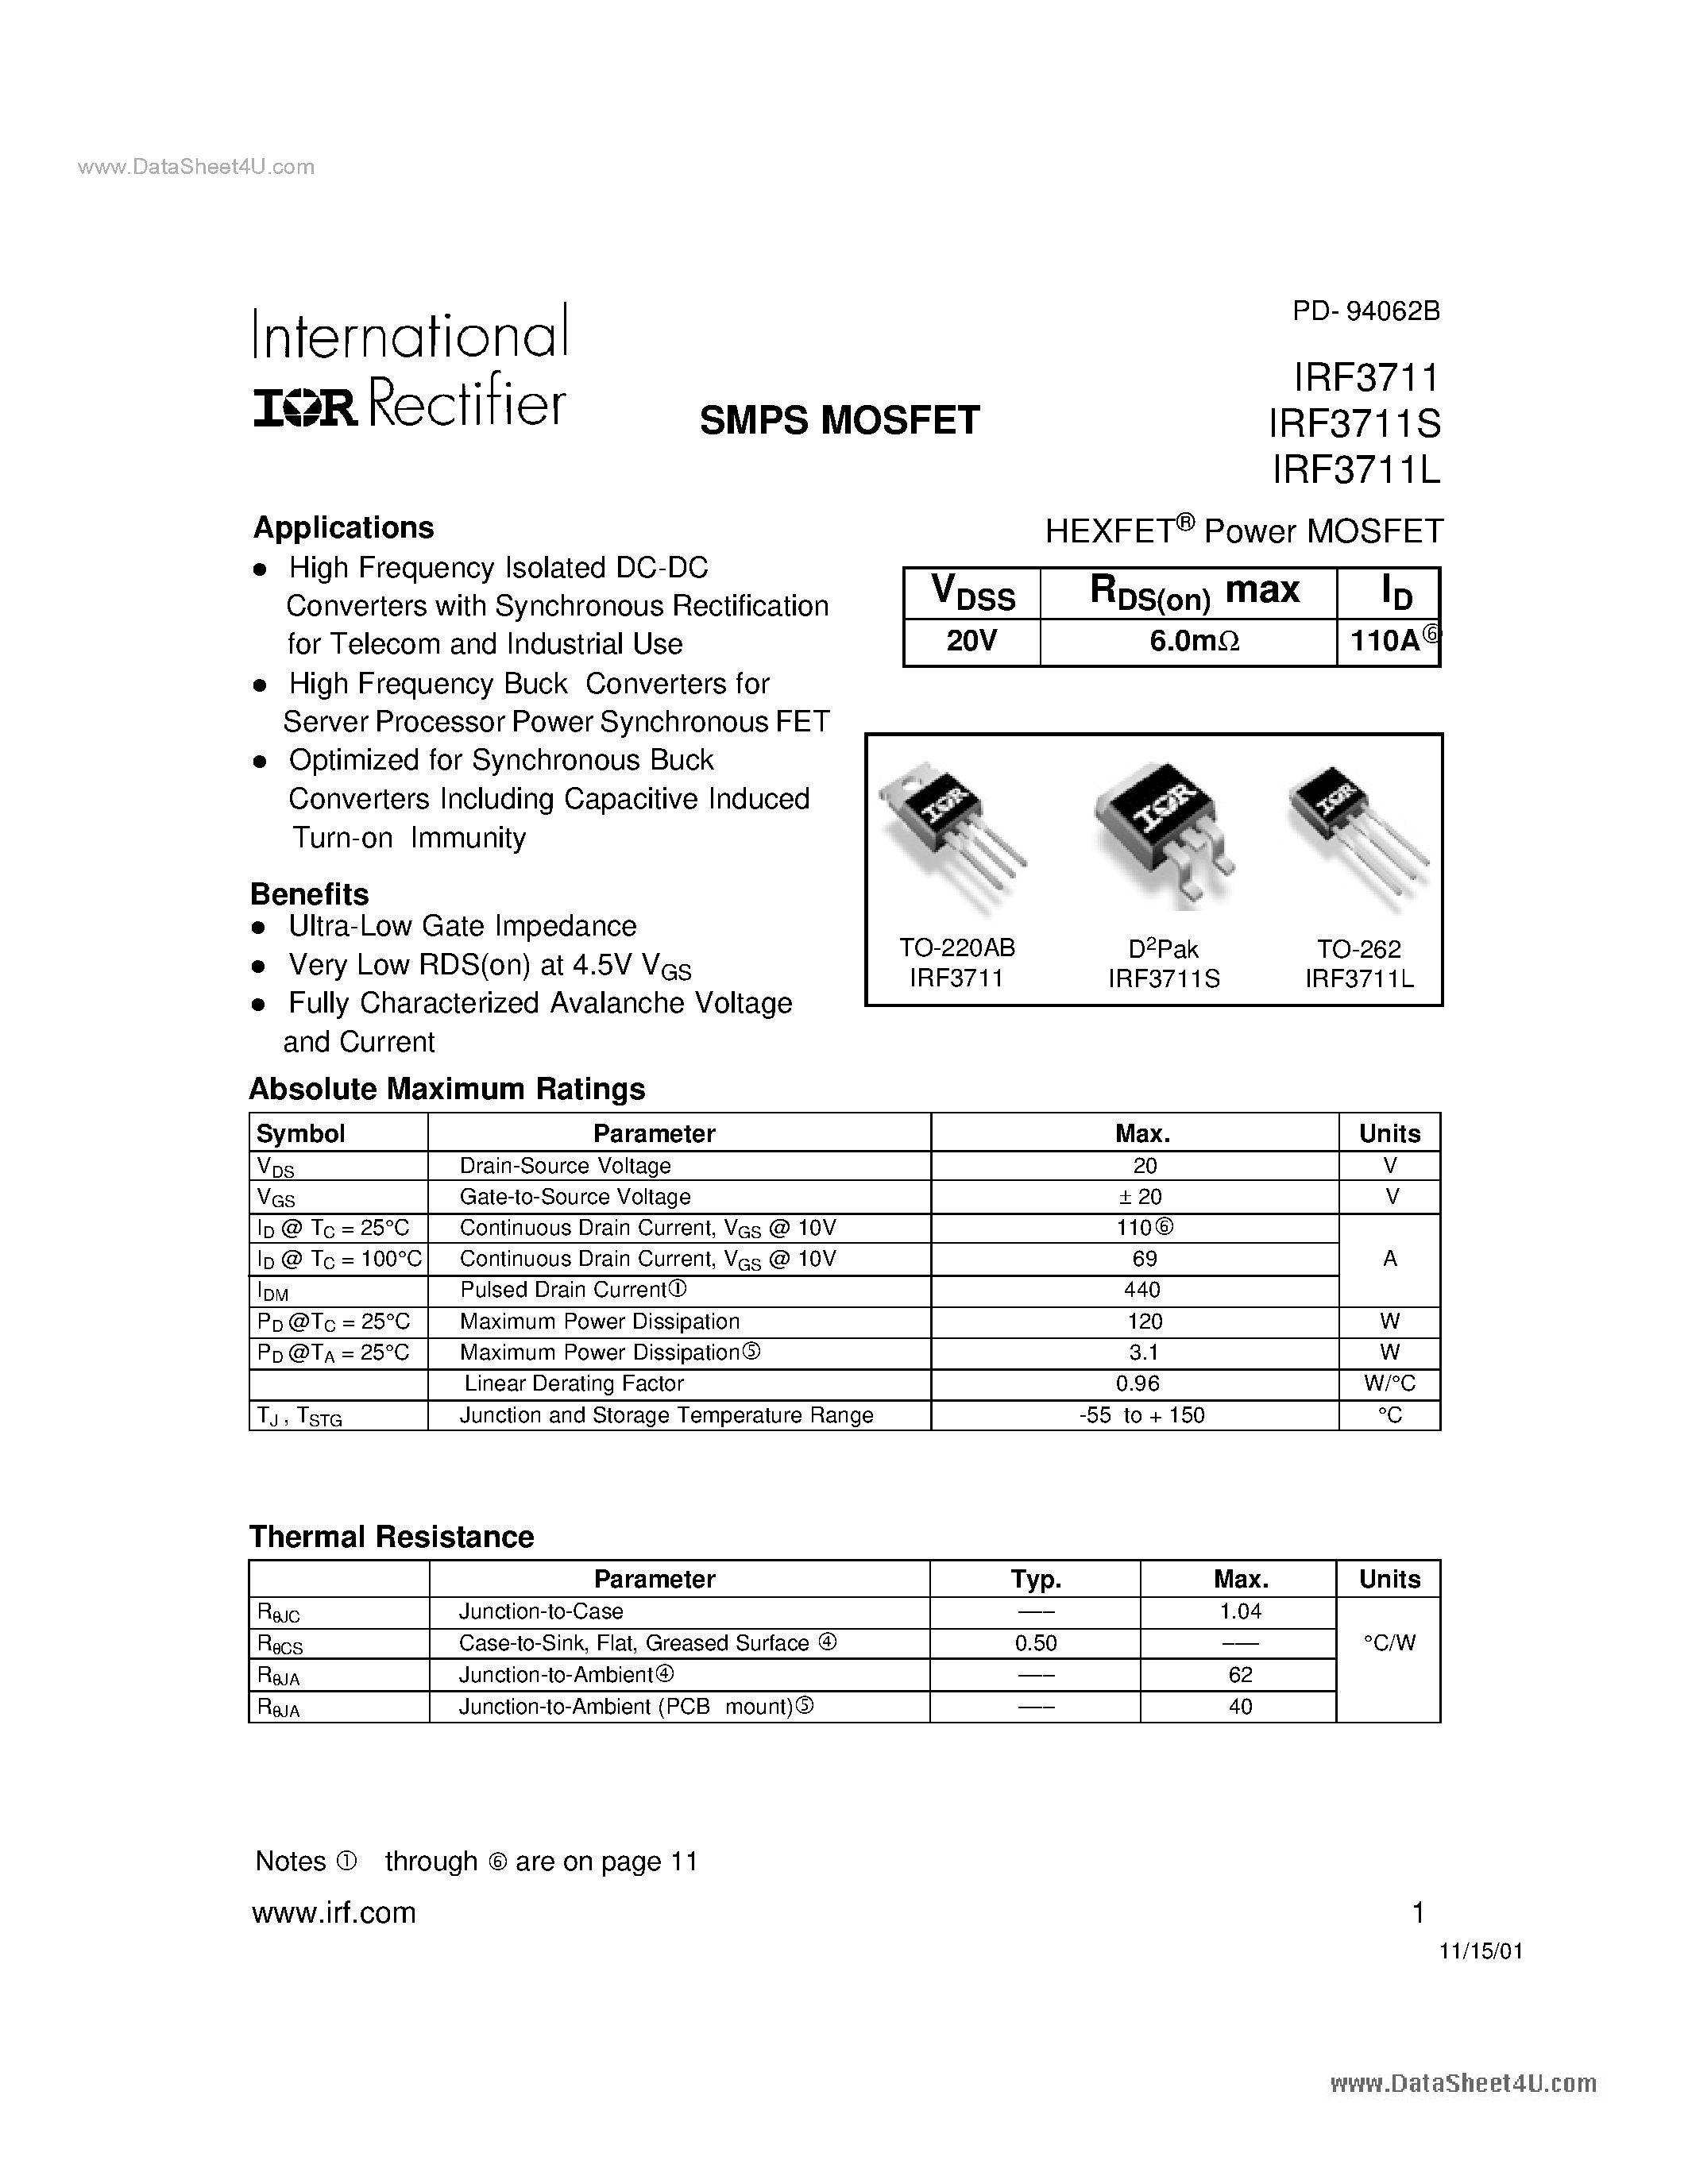 Datasheet F3711S - Search -----> IRF3711S page 1